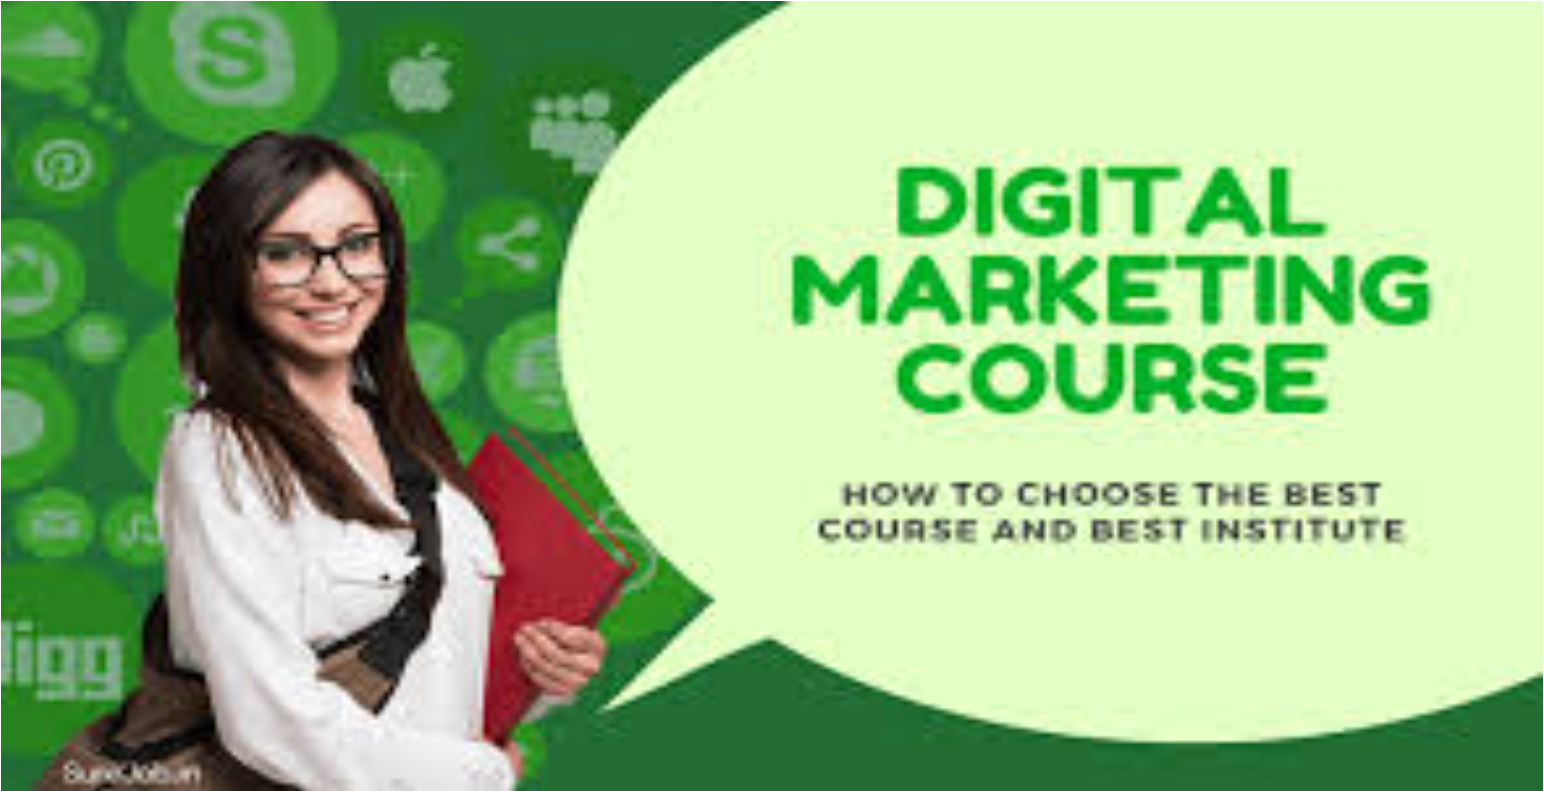 Digital Marketing Courses: Getting Around the Online Education Environment